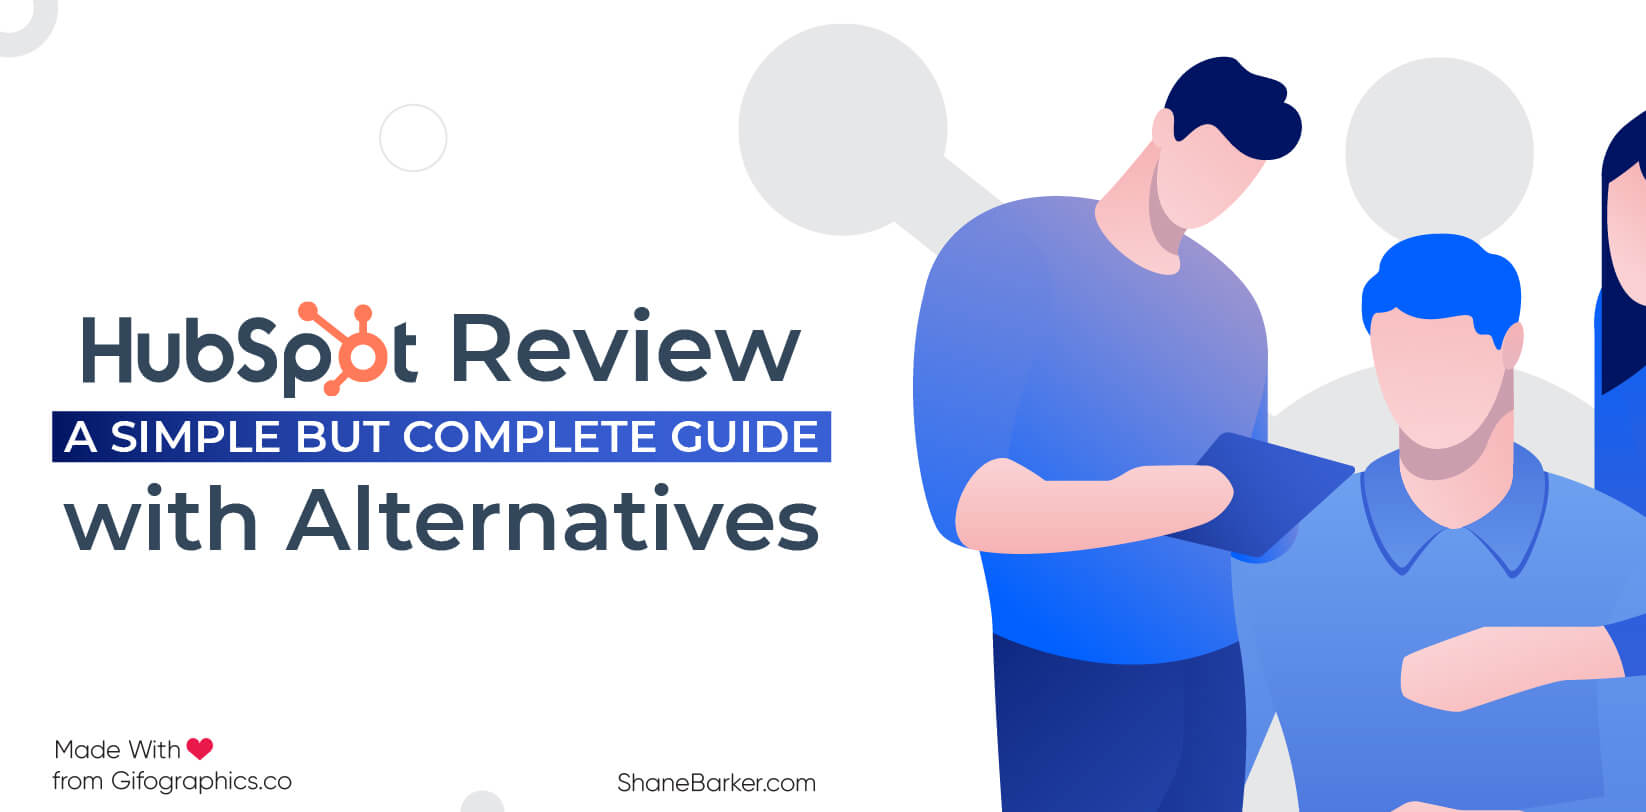 hubspot review: a complete guide with alternatives